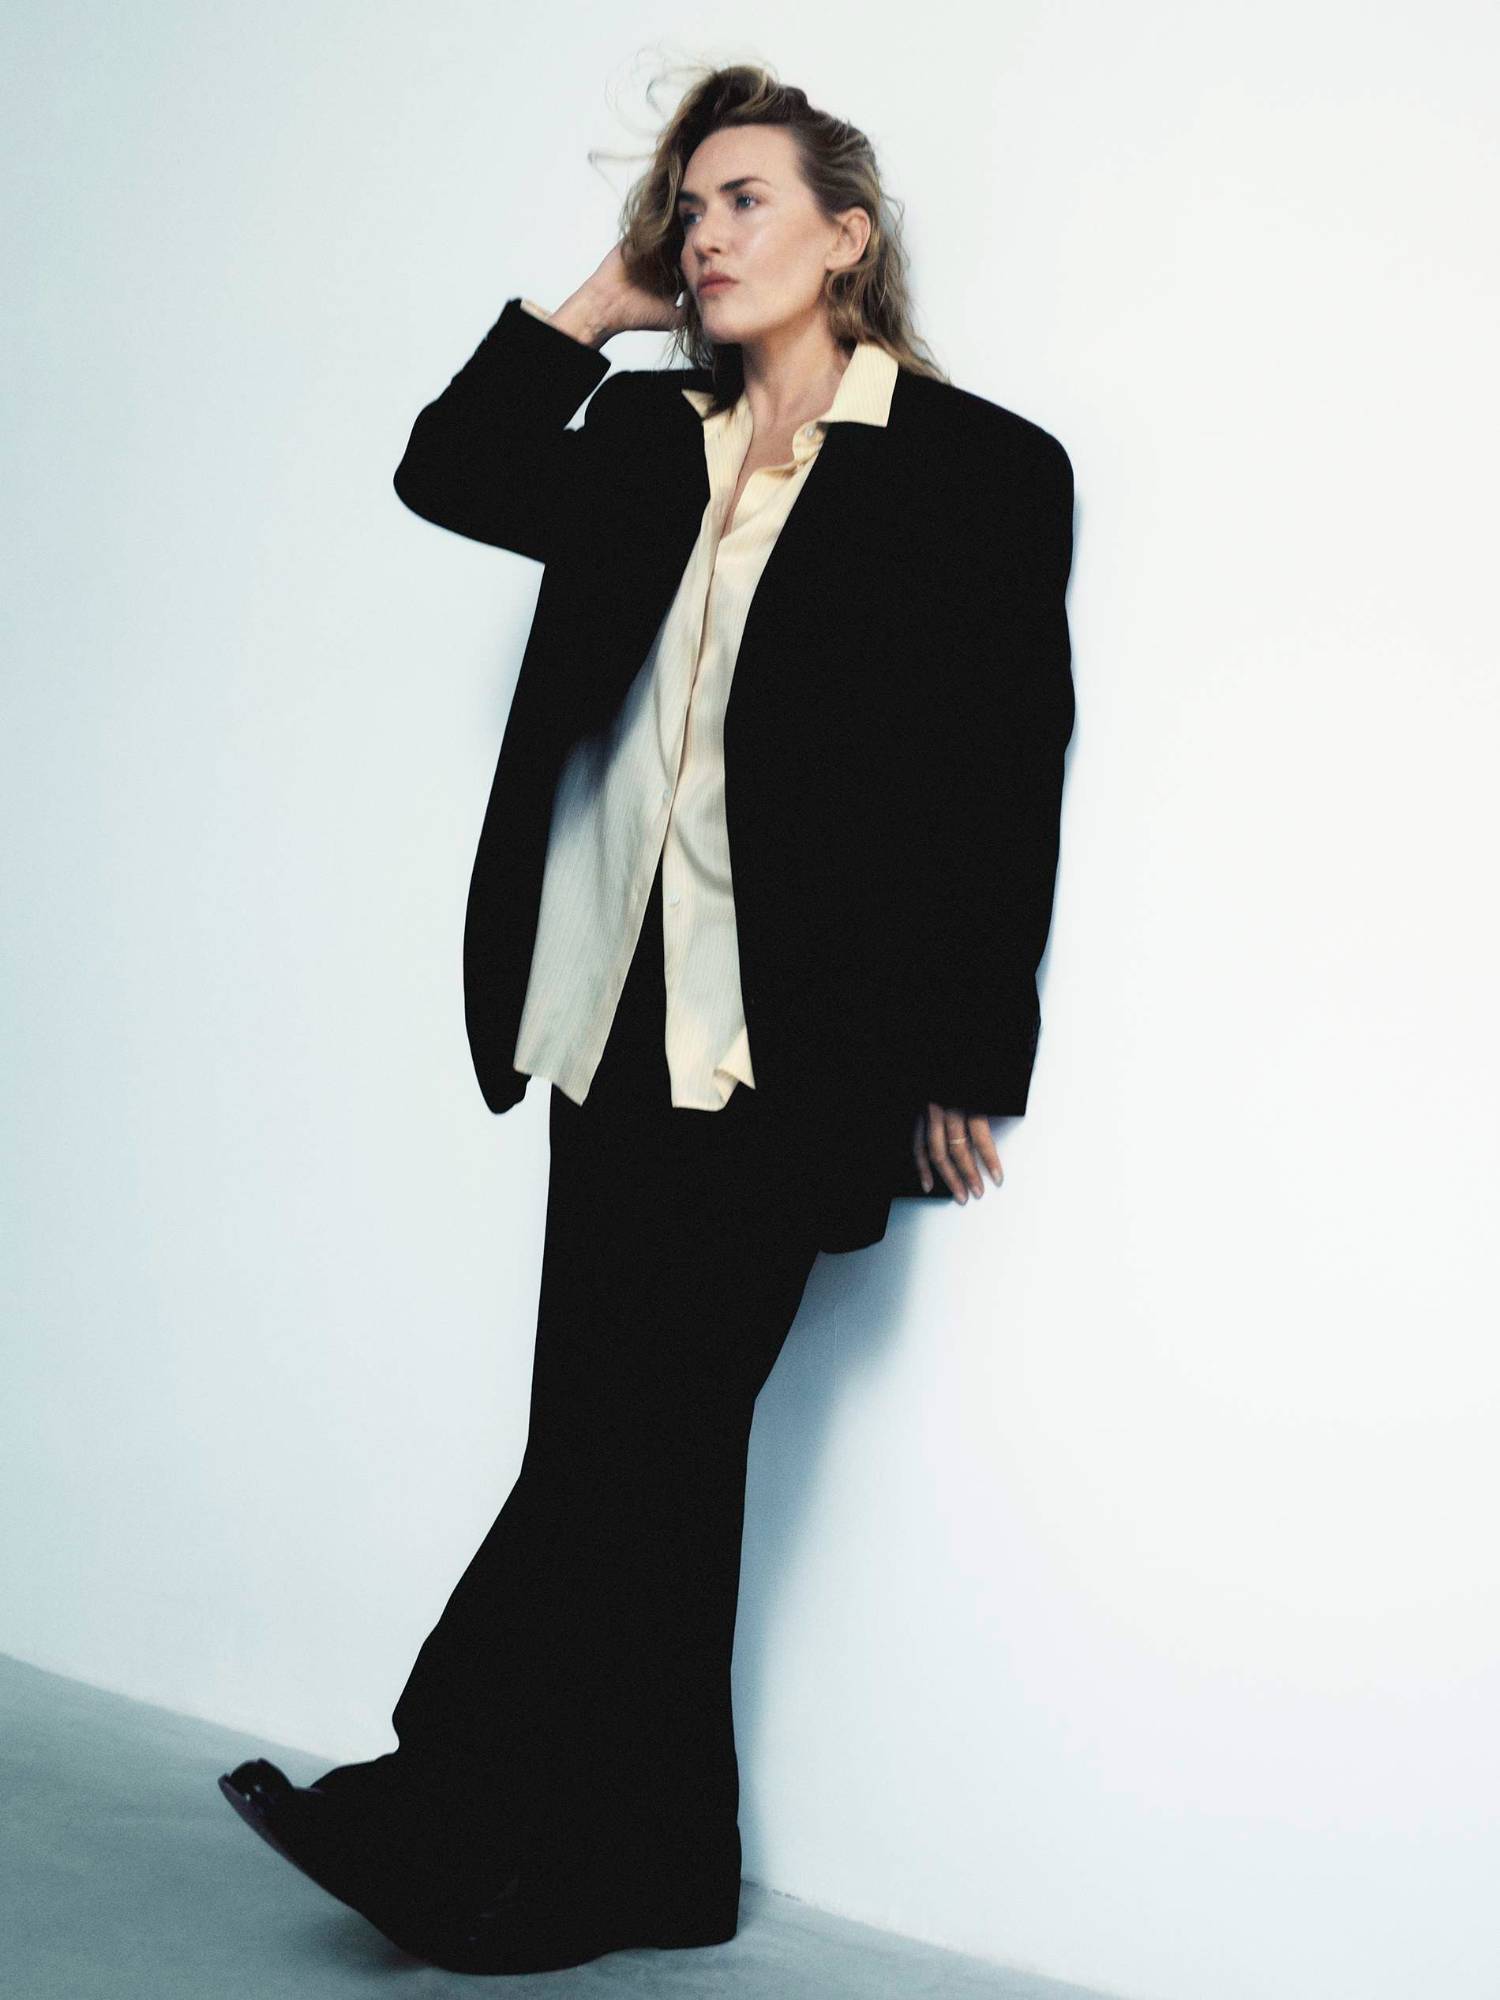 Kate Winslet in The Row Suit by Yulia Gorbachenko for Porter Magazine February 2024